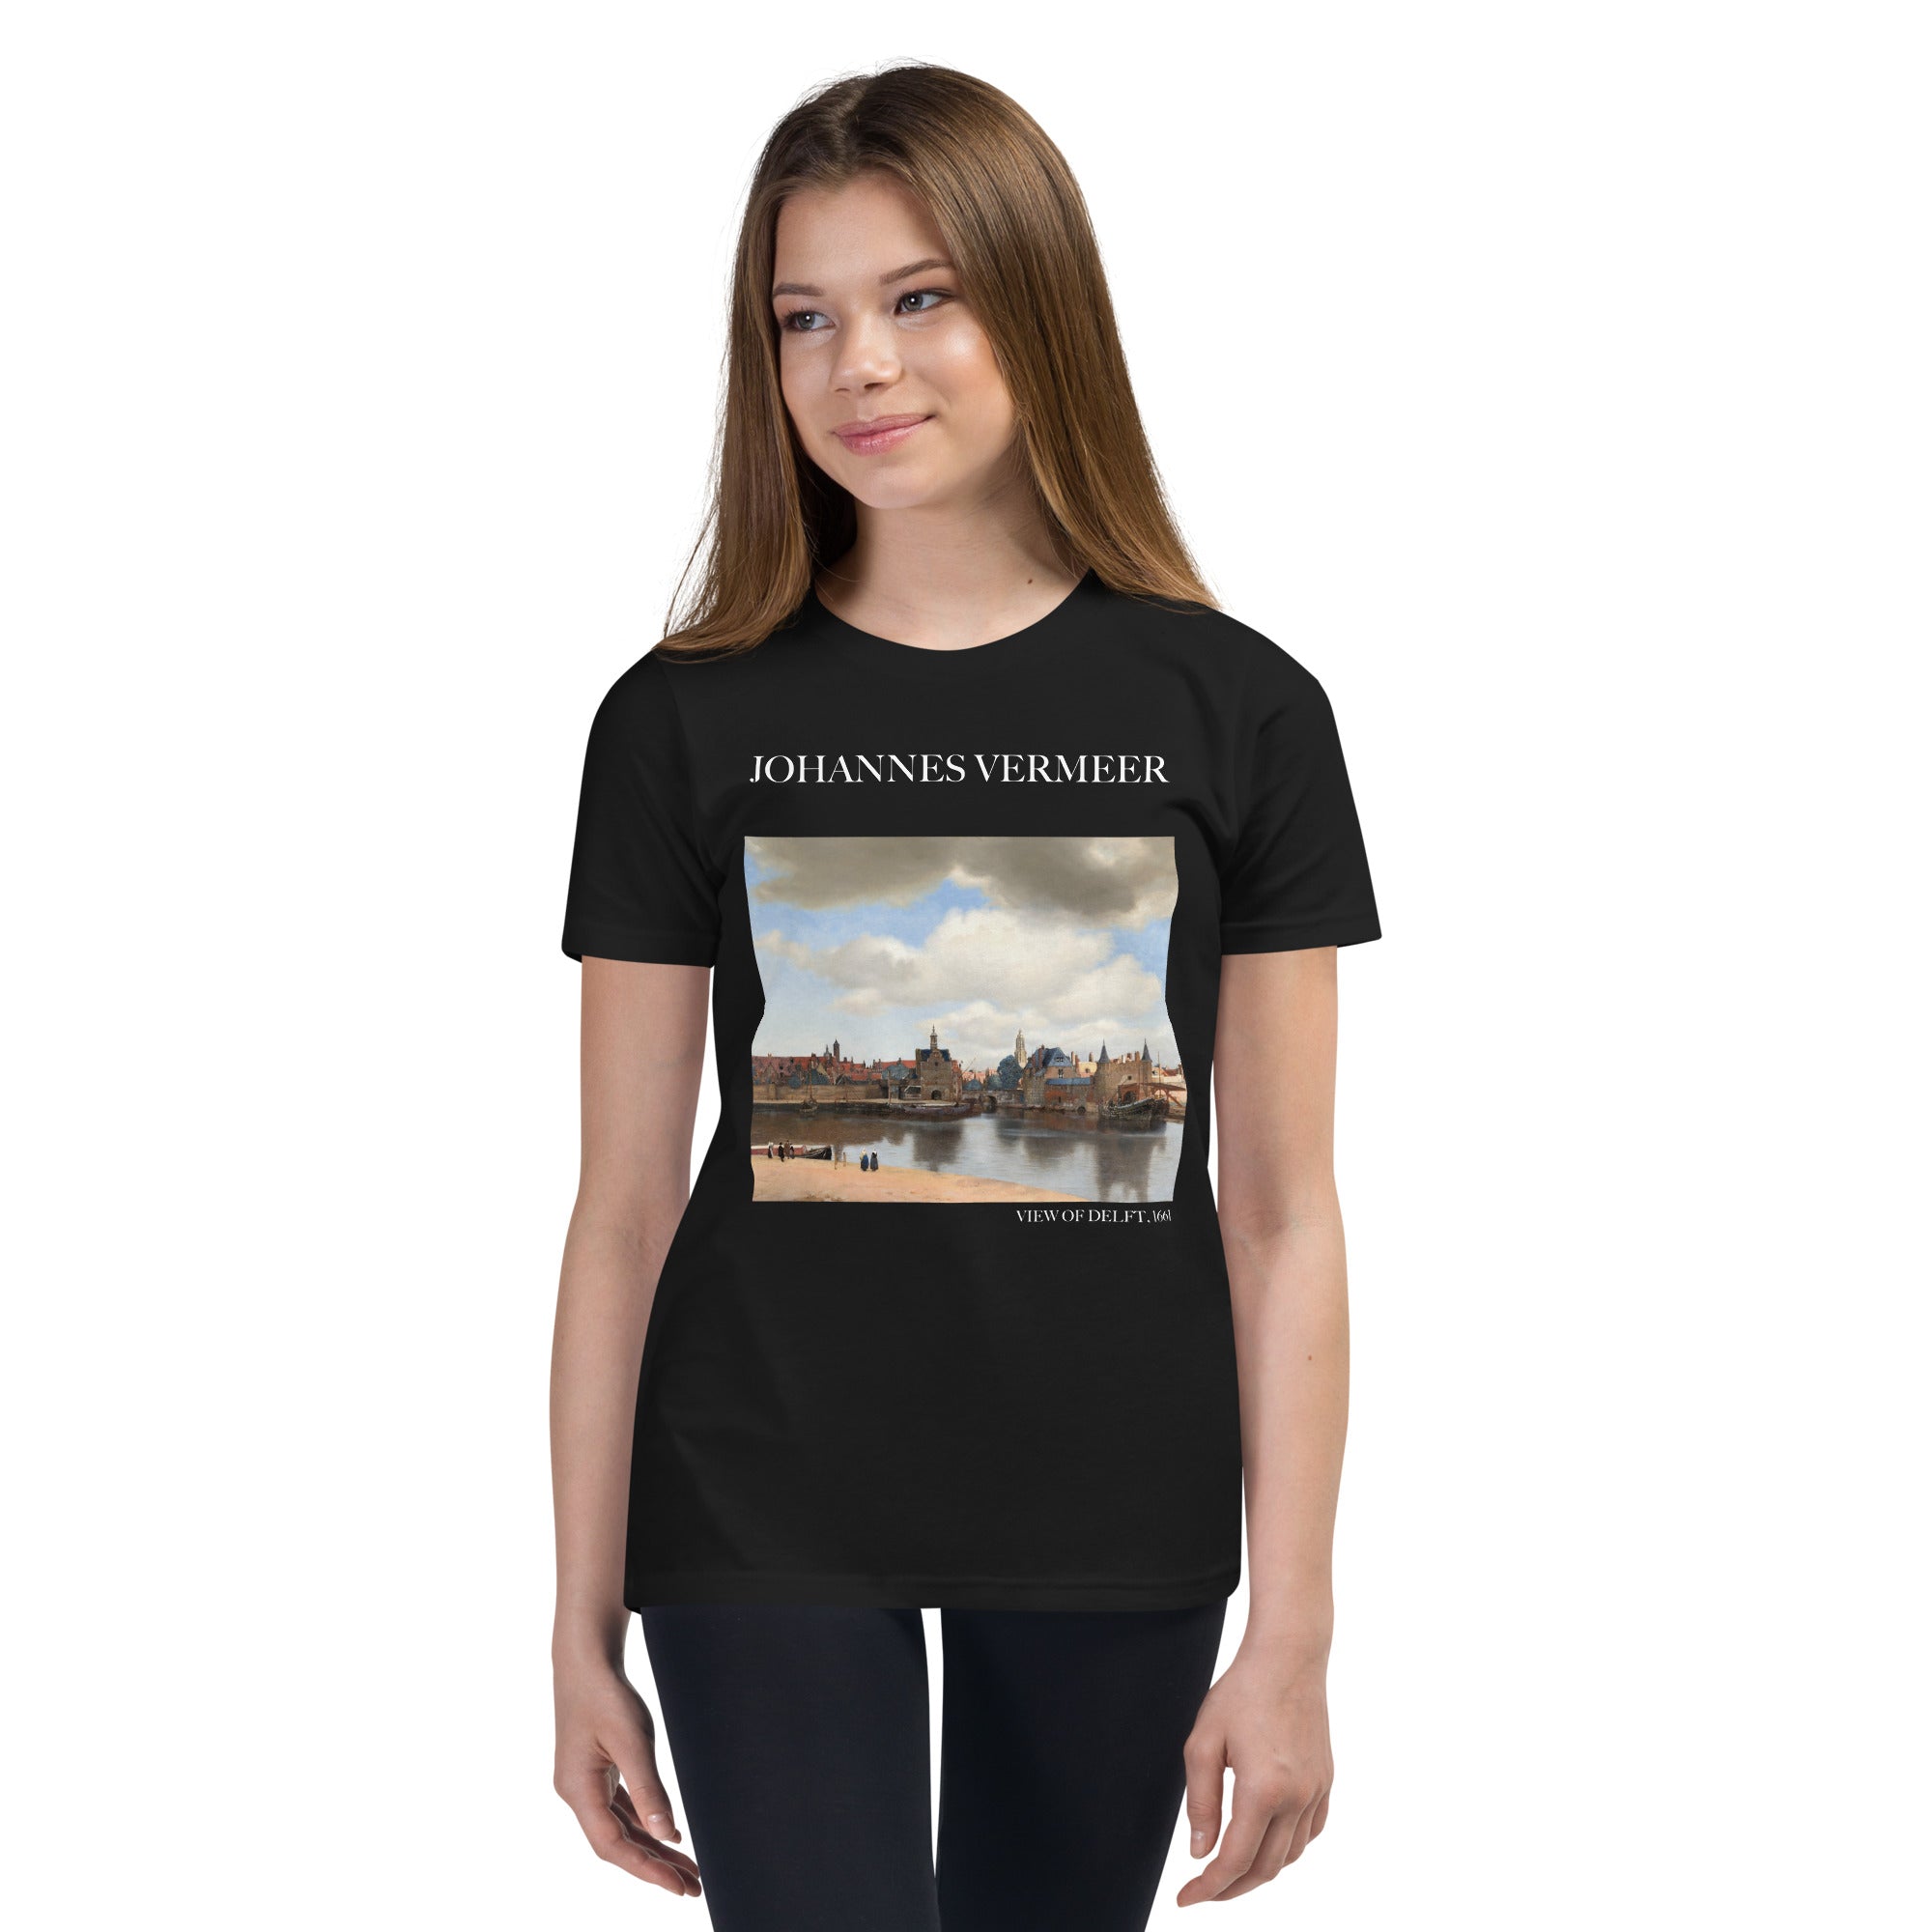 Johannes Vermeer 'View of Delft' Famous Painting Short Sleeve T-Shirt | Premium Youth Art Tee